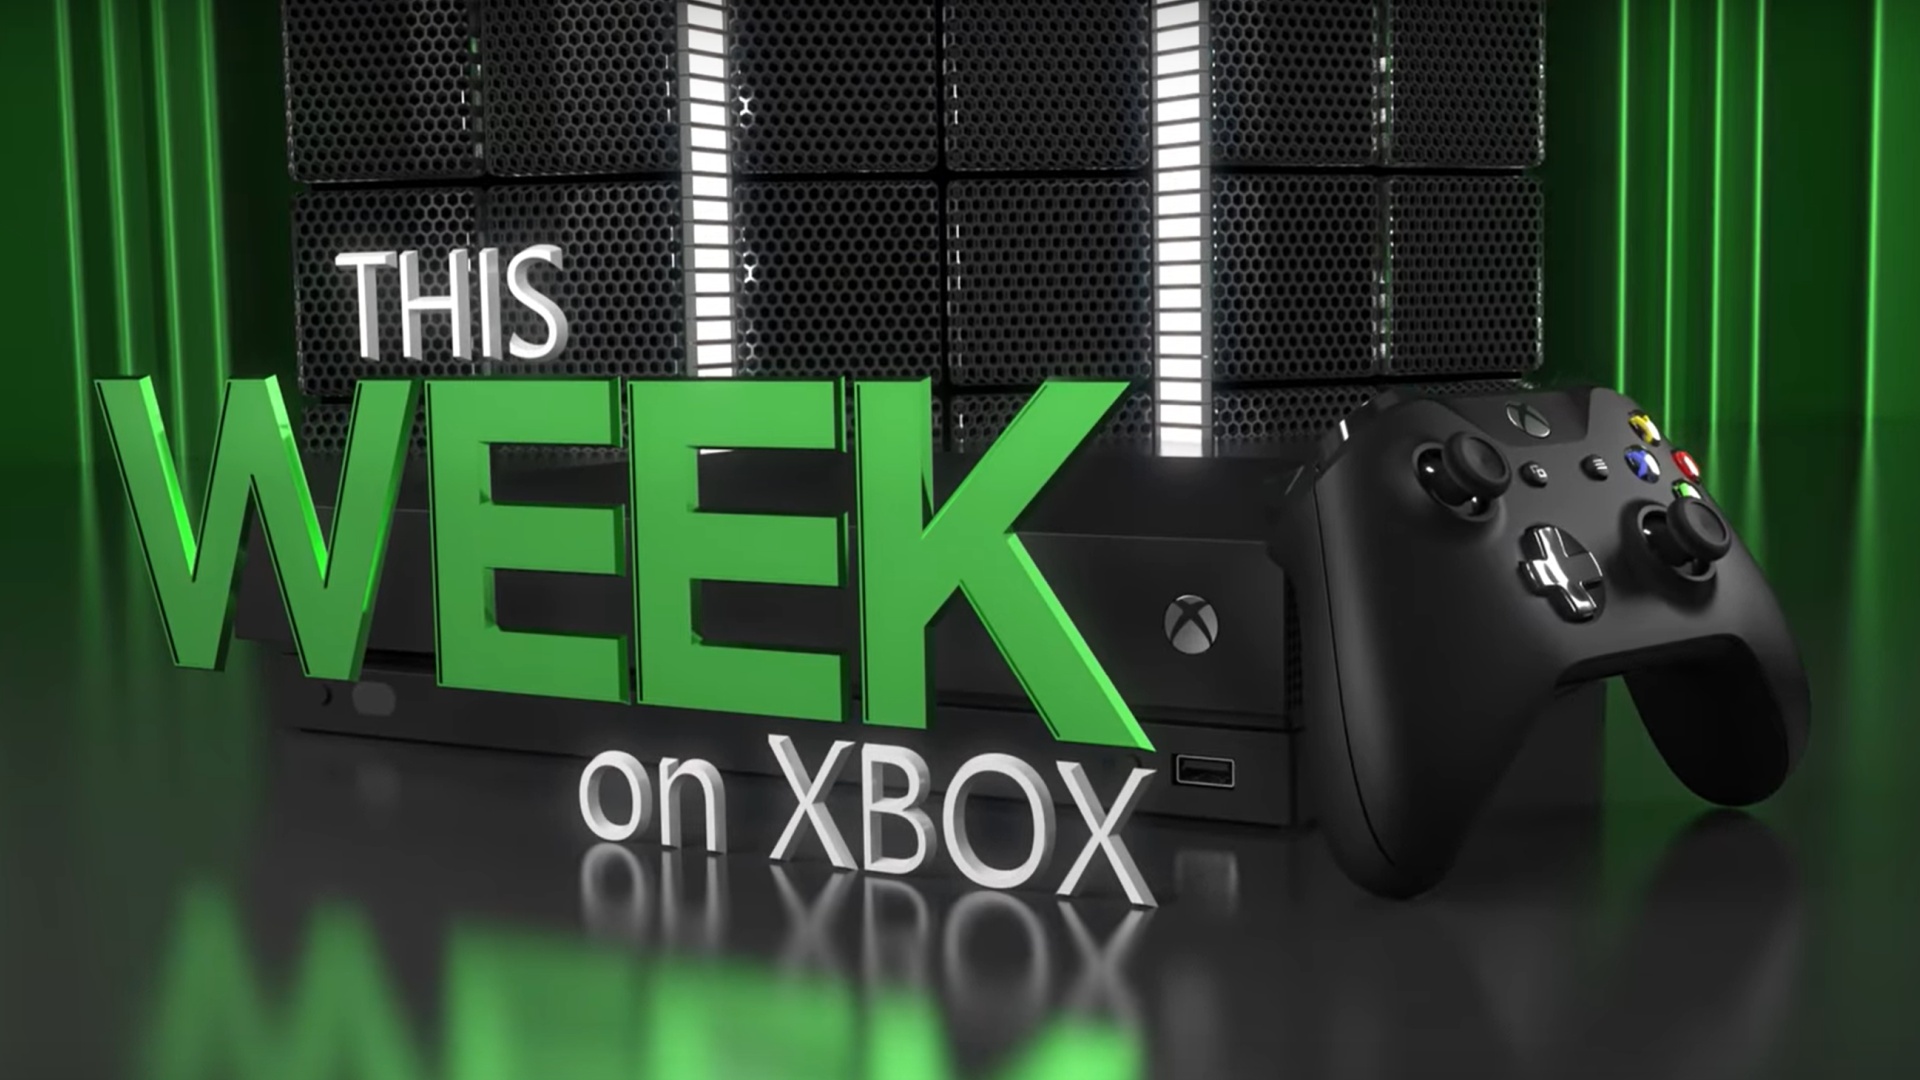 Video For This Week on Xbox: February 28, 2020